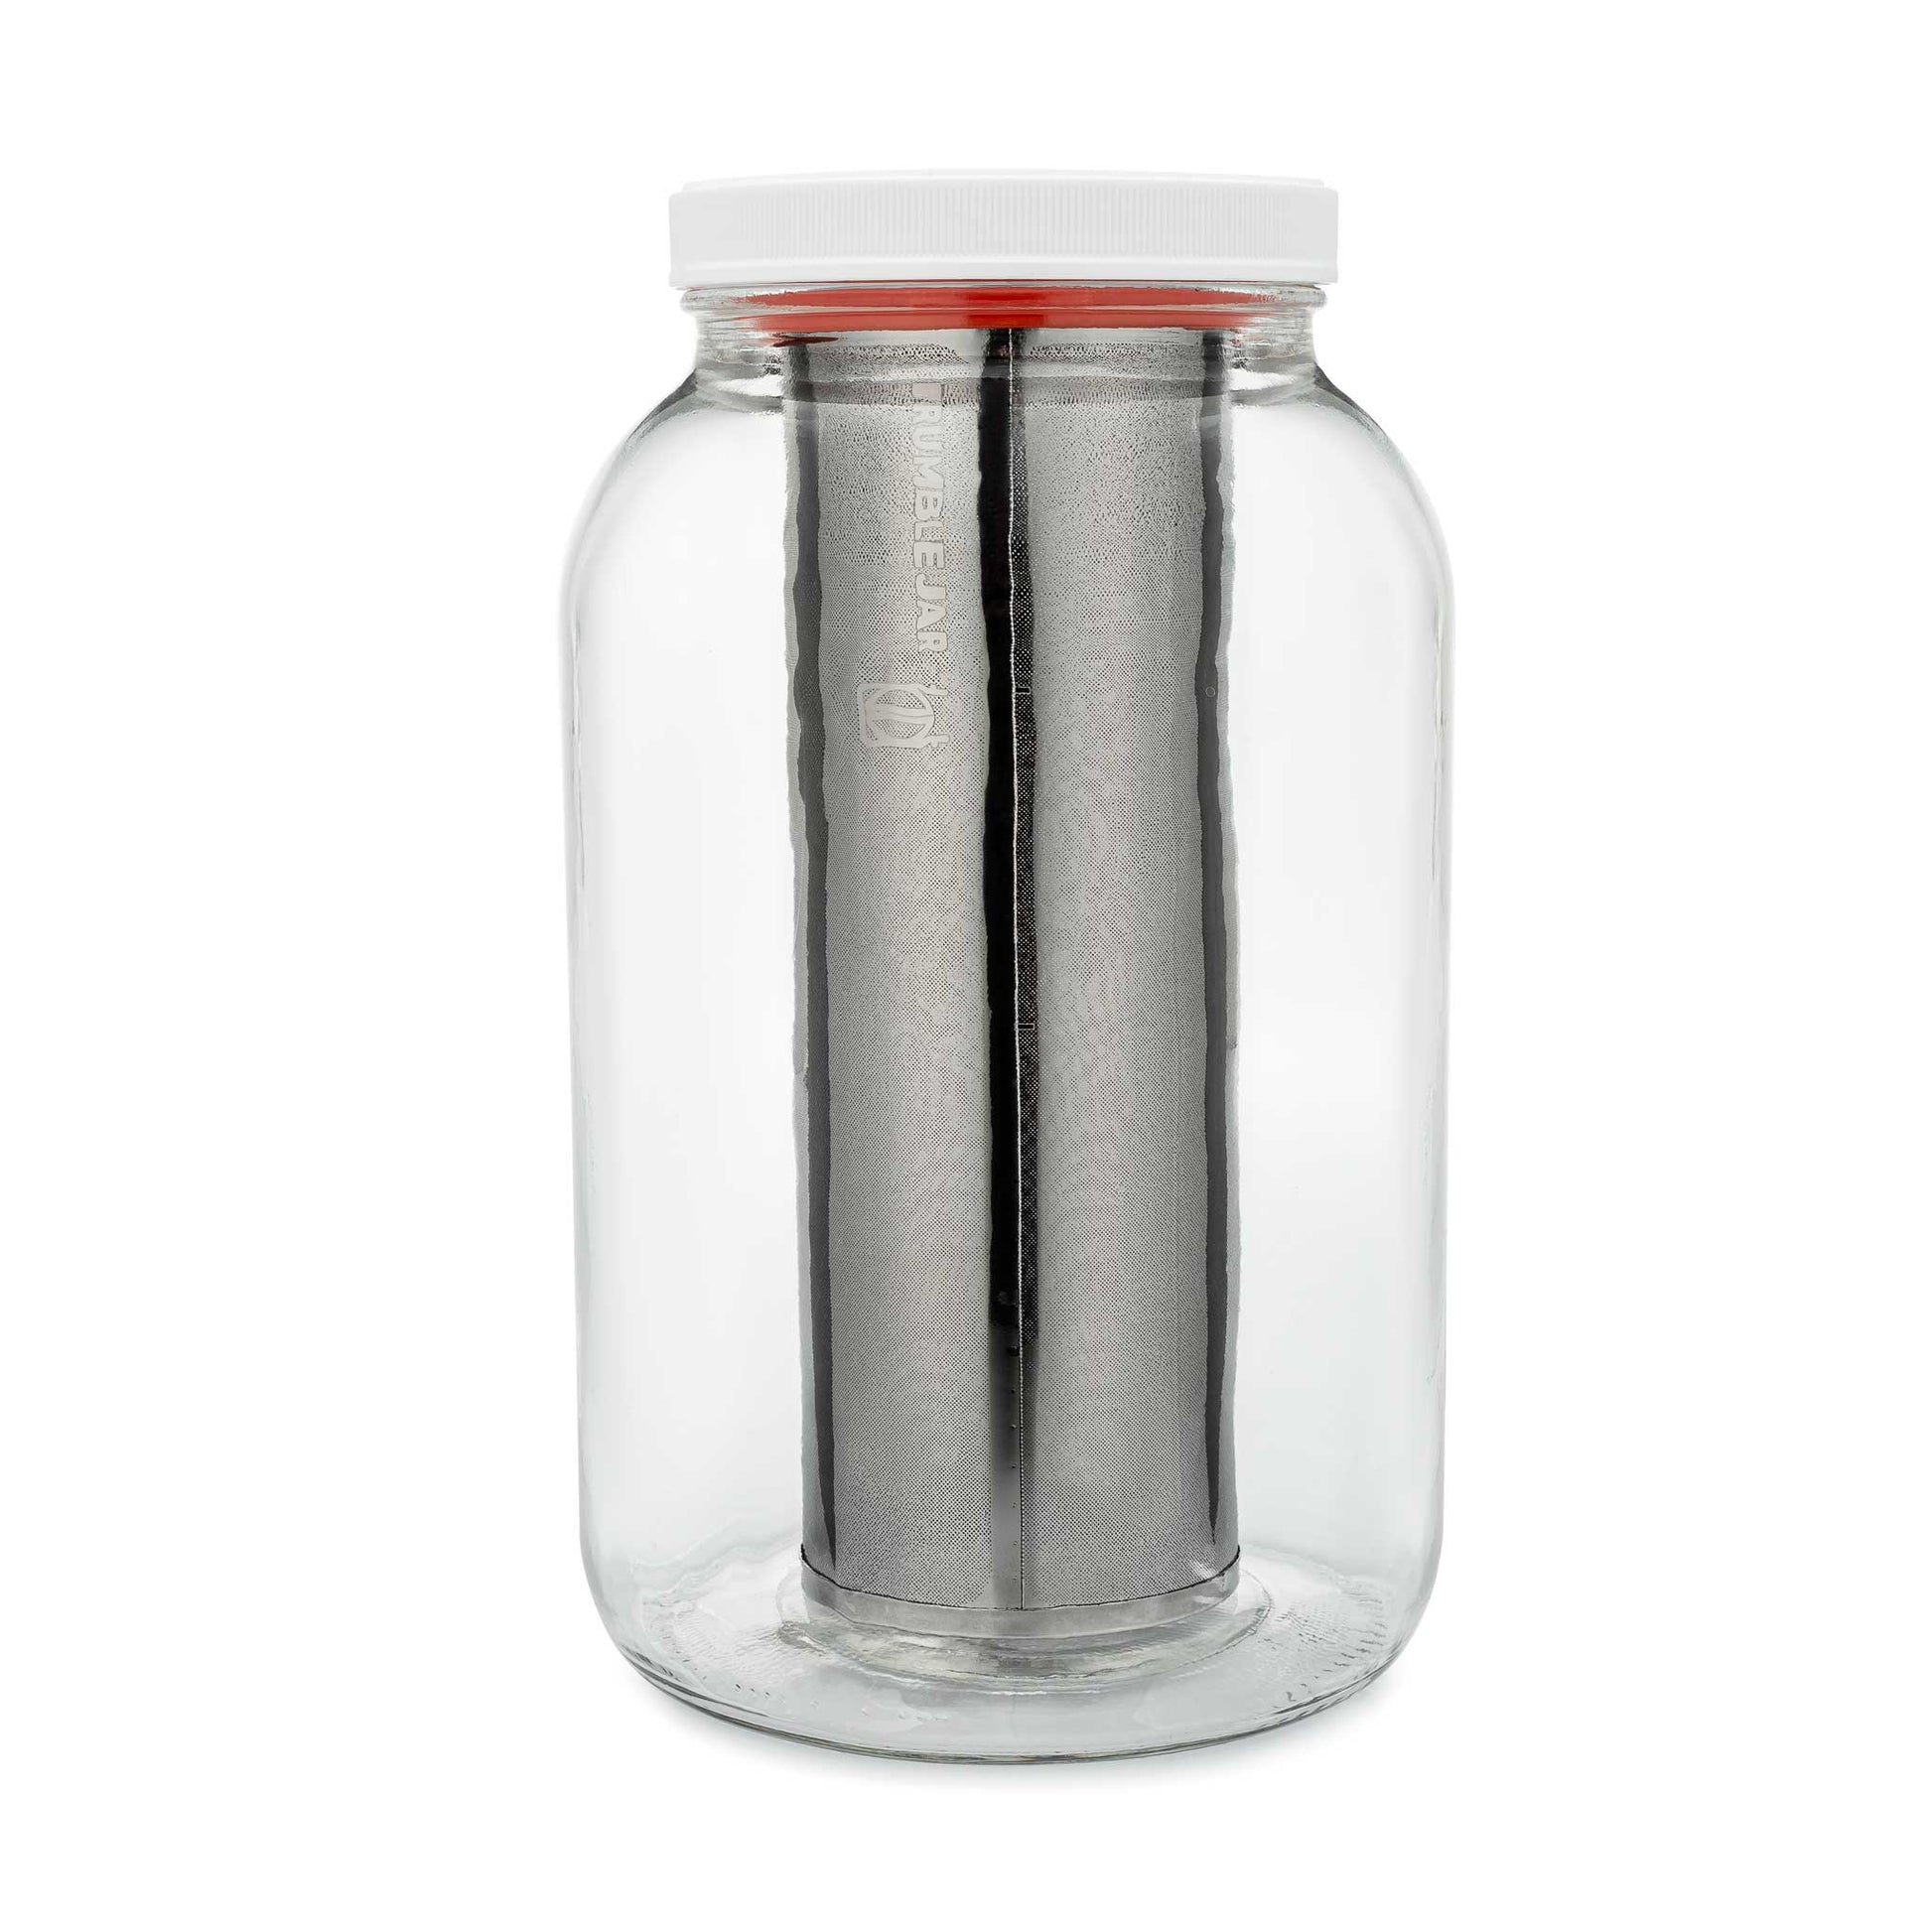 Rumble Jar one gallon 128 ounce cold brew filter inside a compatible glass jar